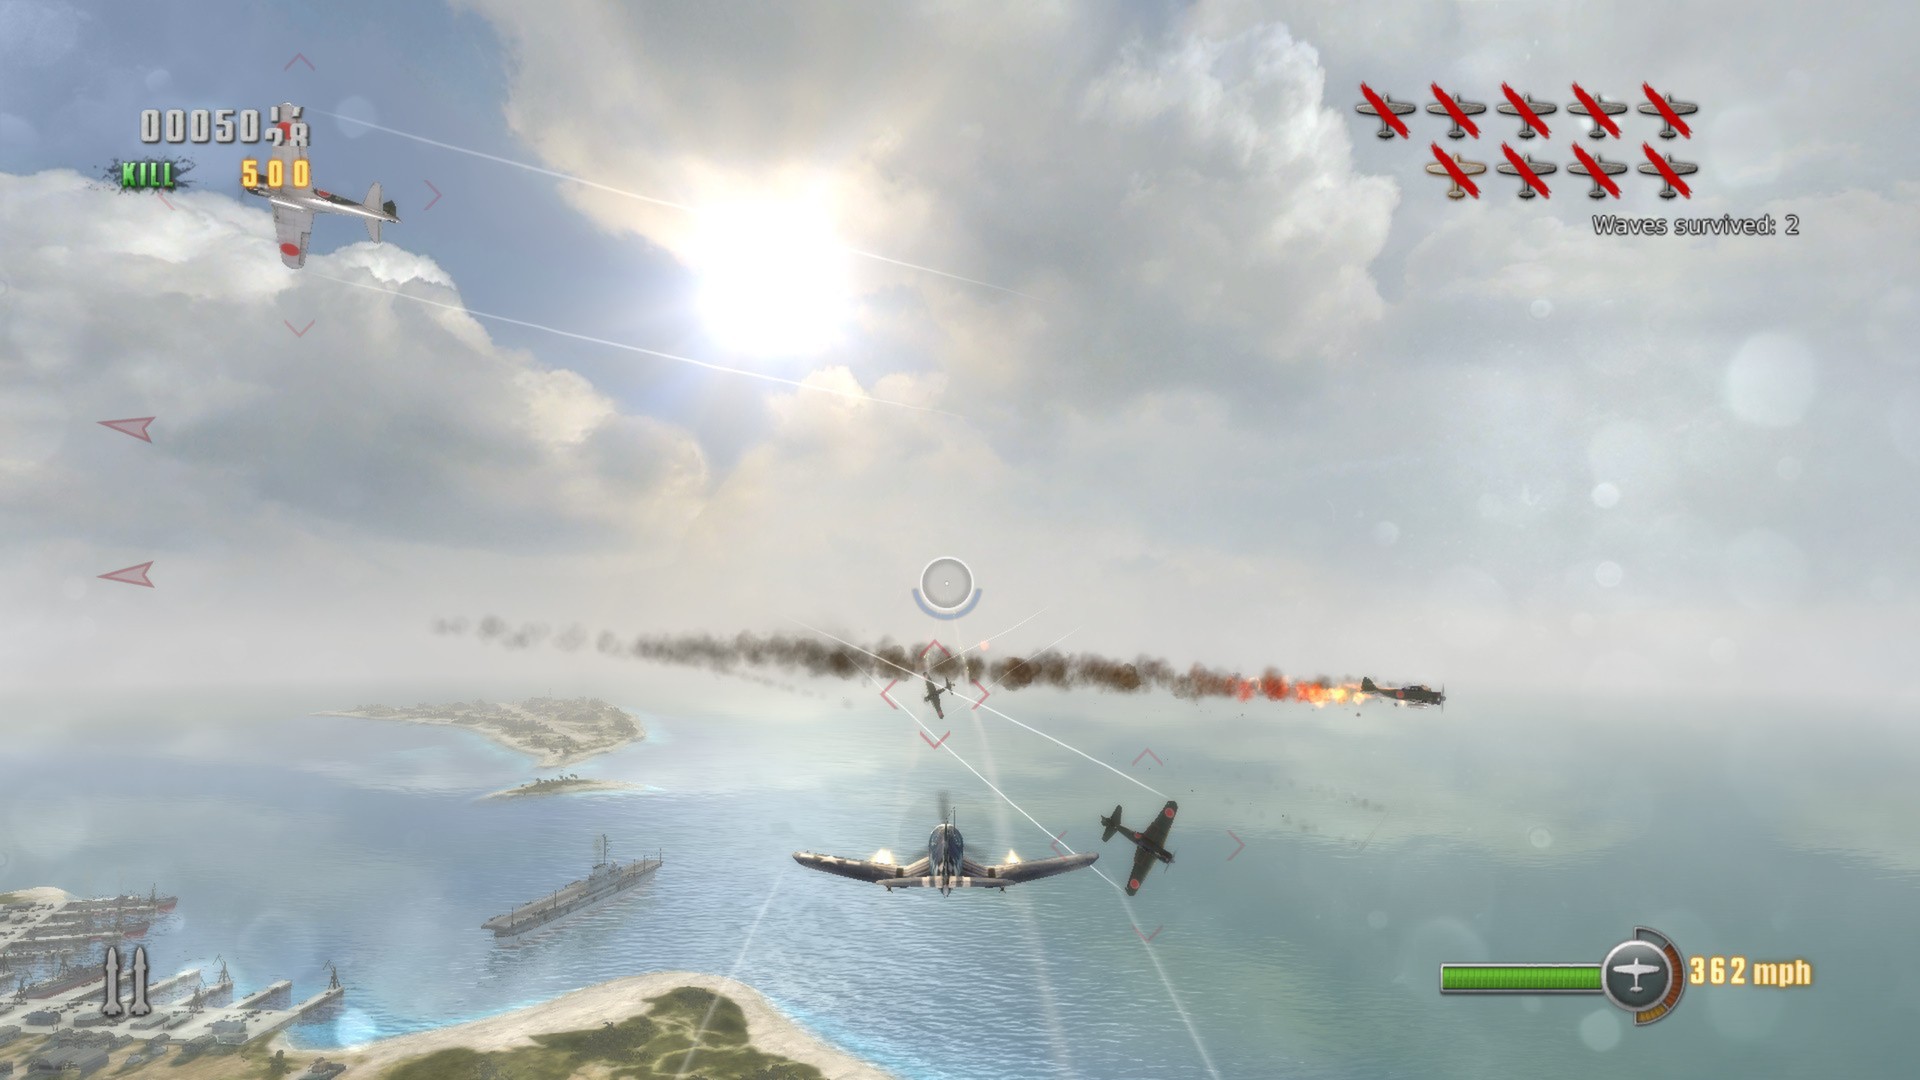 Save 80% on Dogfight 1942 on Steam